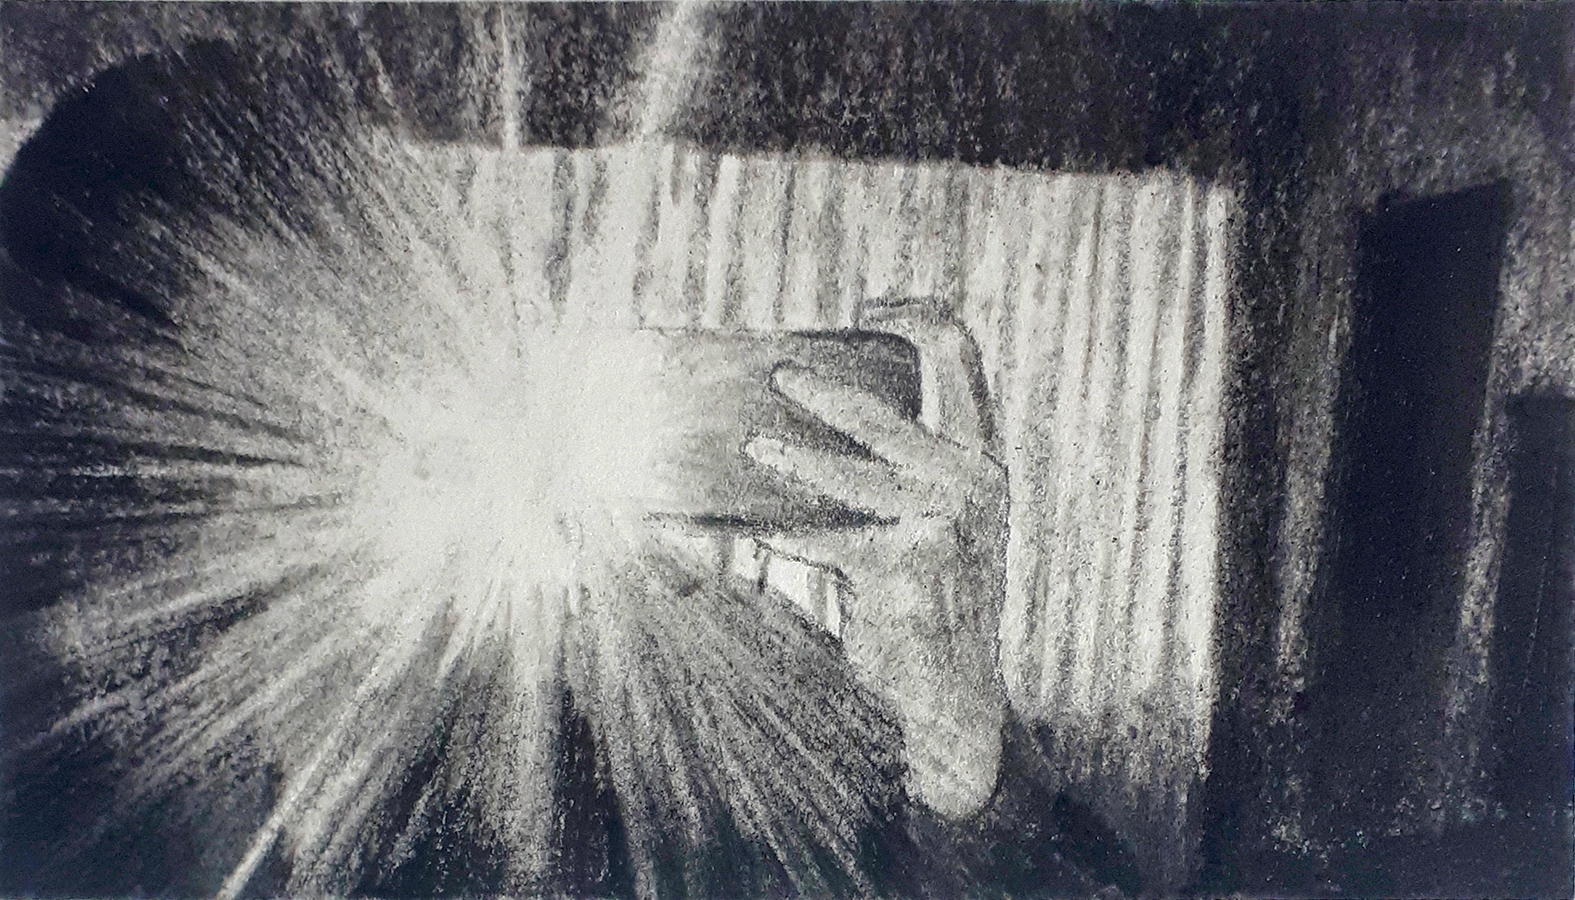 Kyle Beal, In A Flash (G), 2018 – 2021, charcoal, graphite, pastel on cotton rag. Image courtesy the artist.